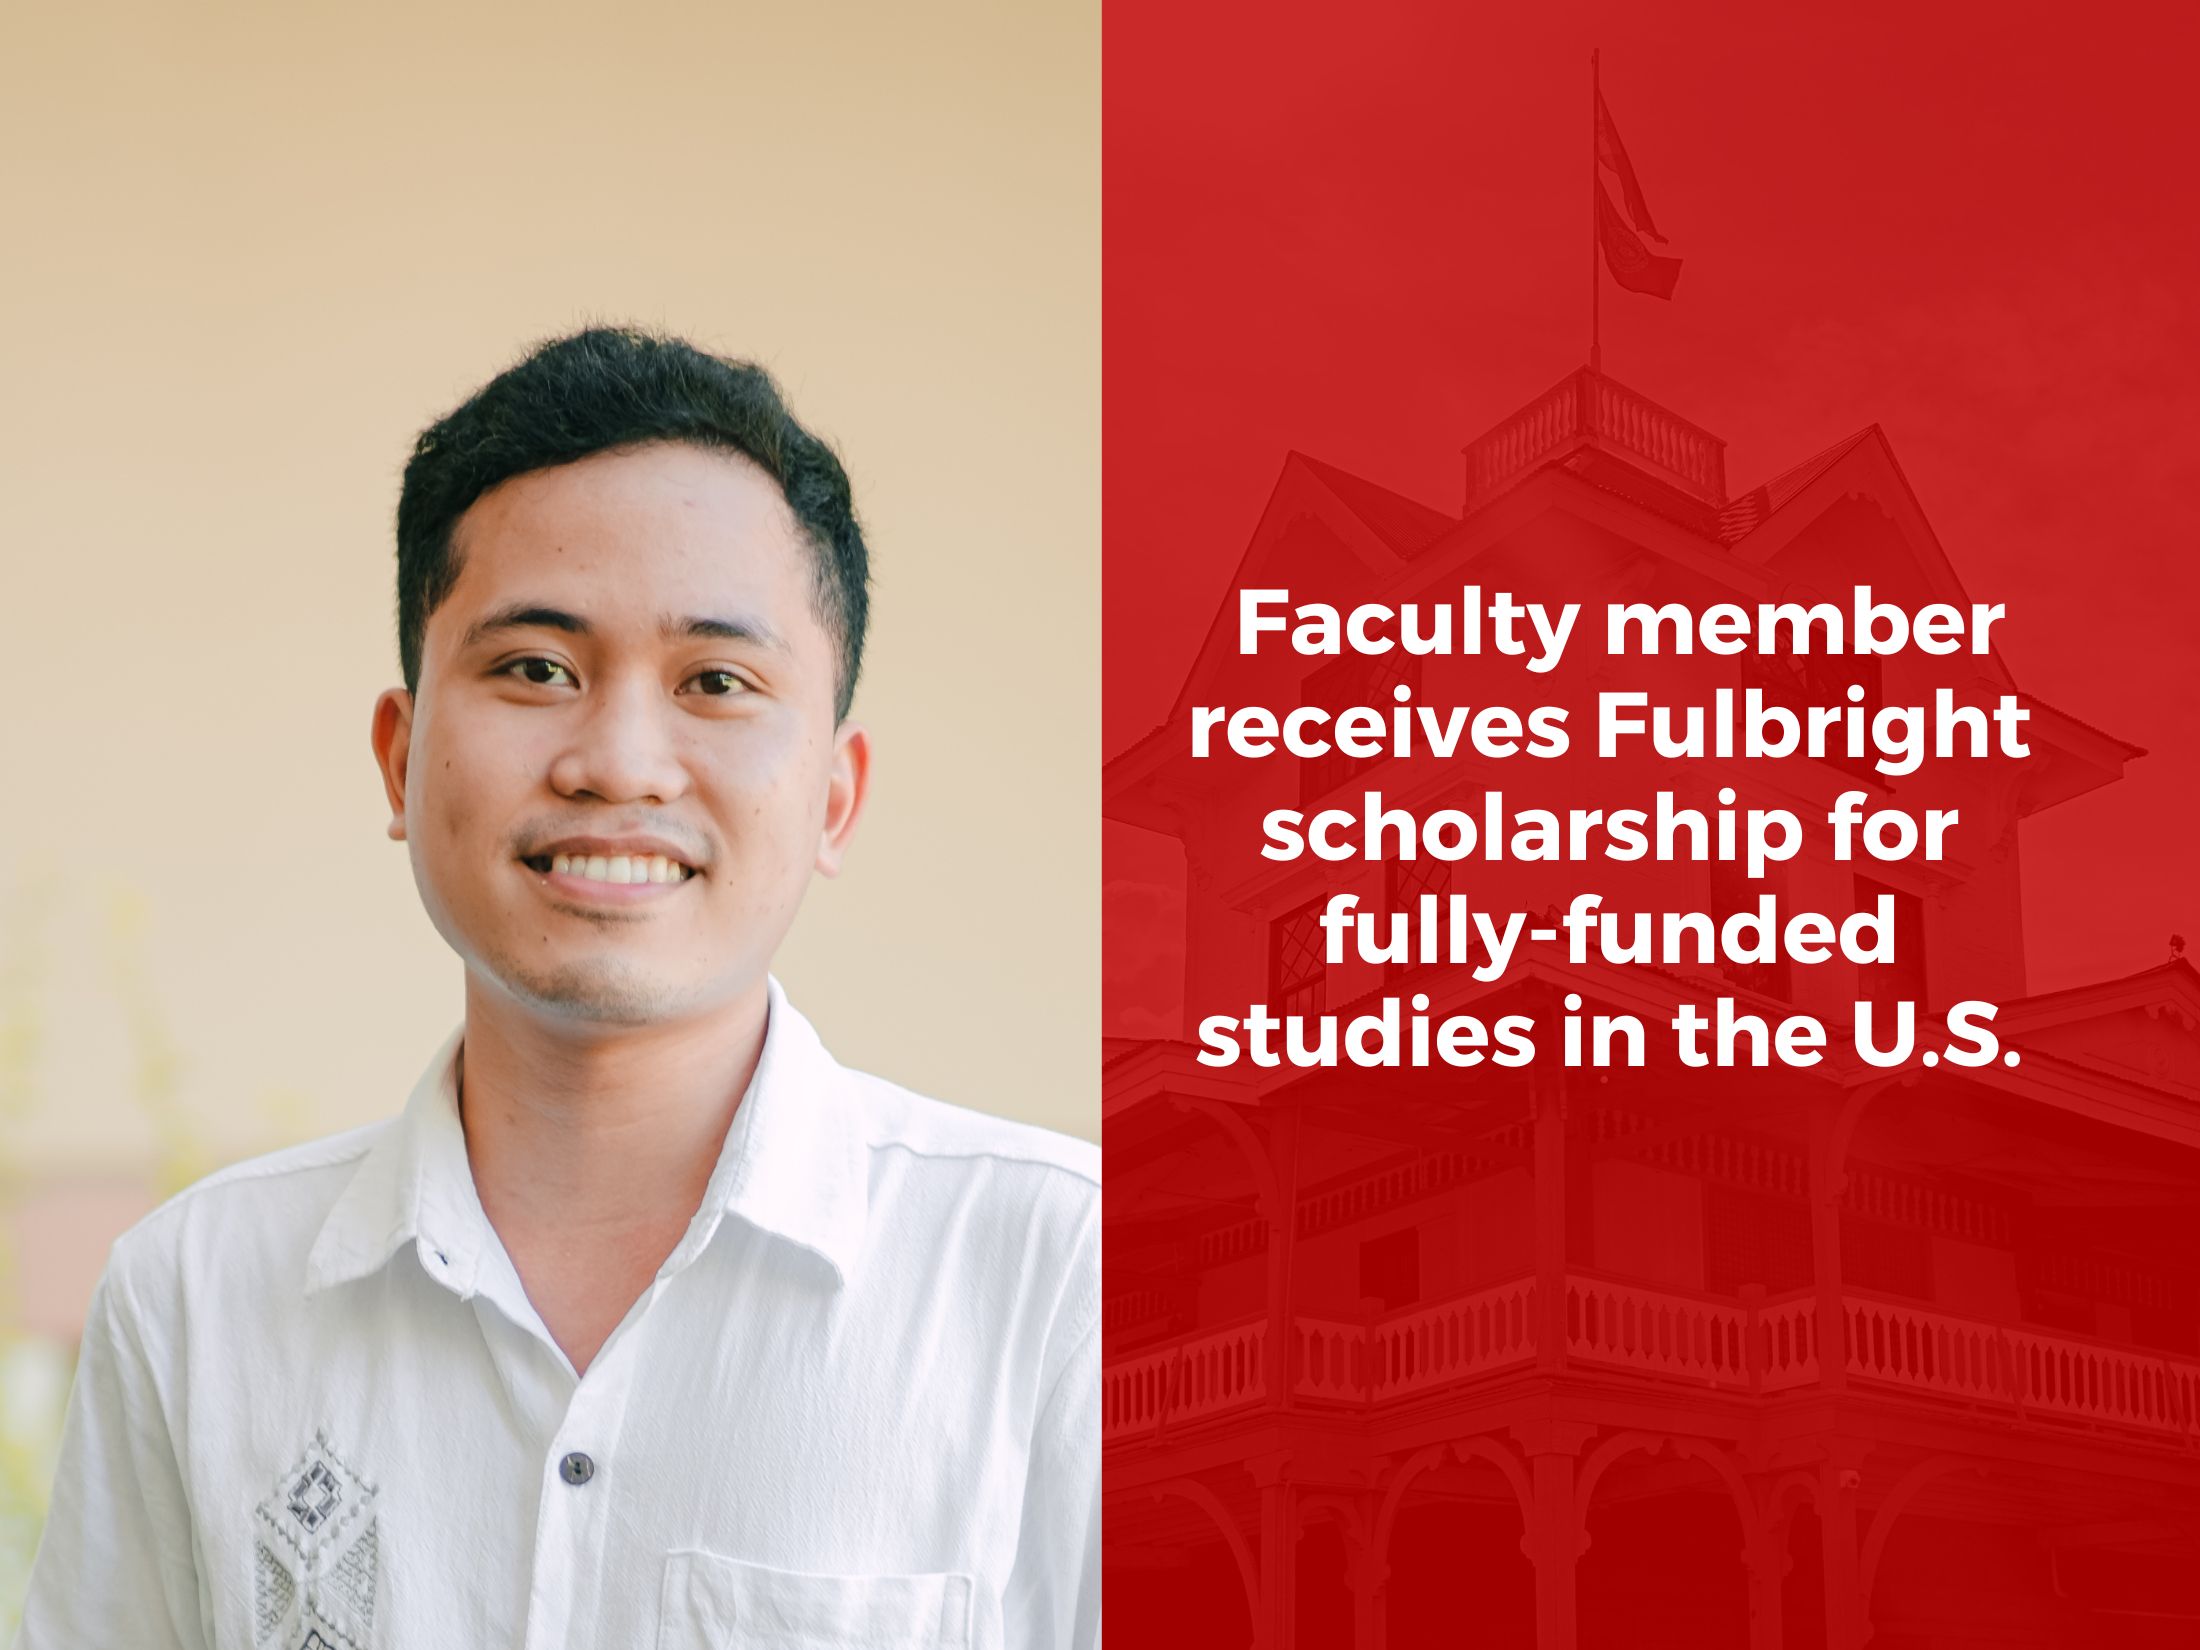 Faculty member receives Fulbright scholarship for fully-funded studies in the U.S.